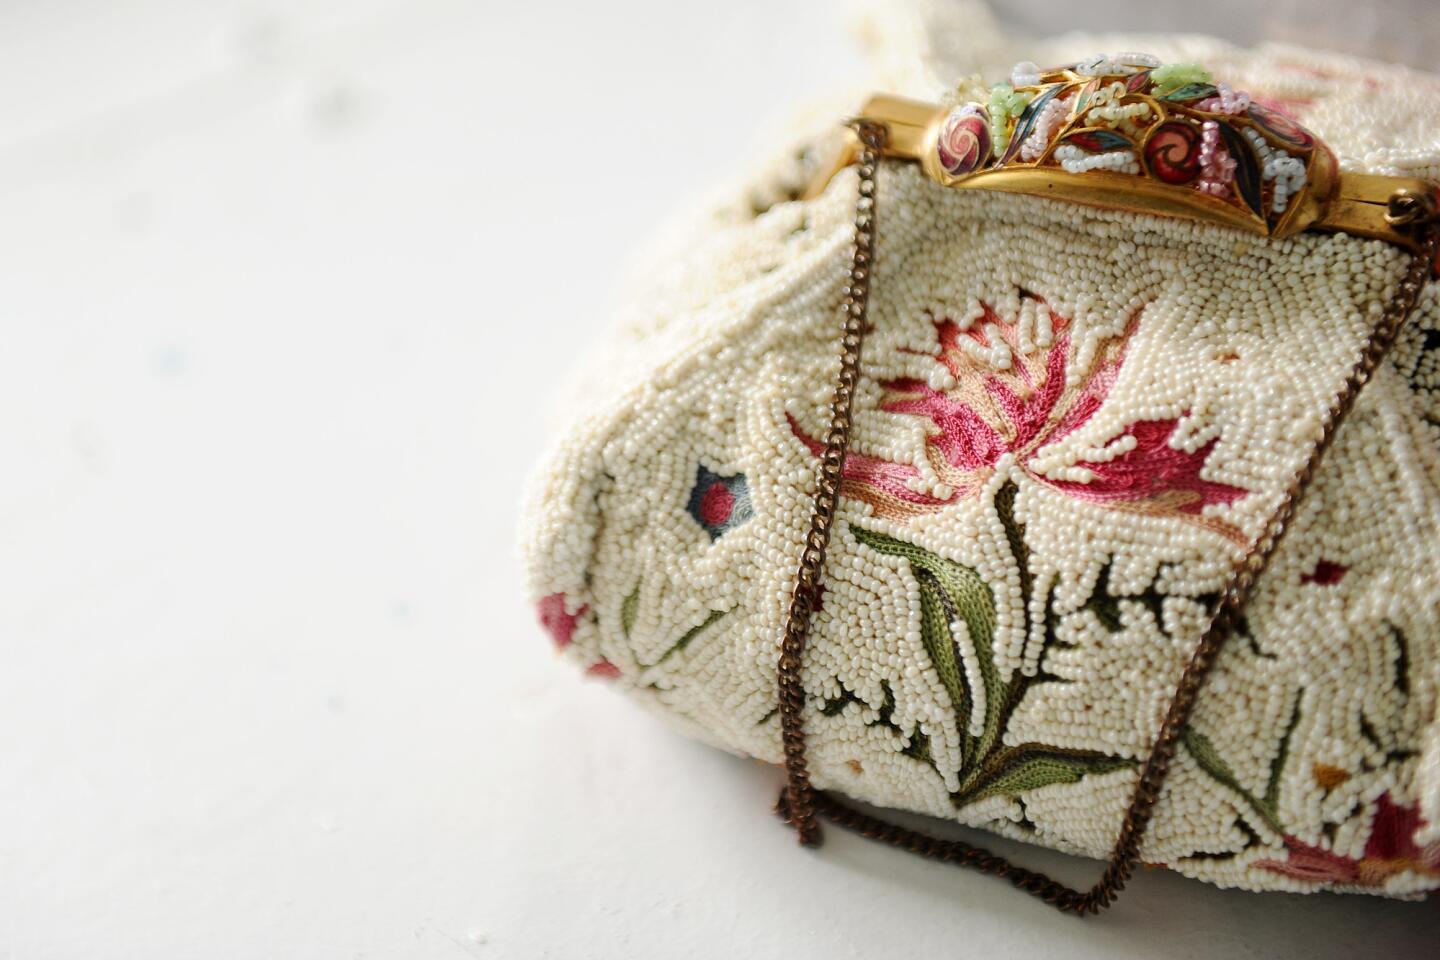 Fauré Le Page Has A New Collection Of Intricately Embroidered Bags